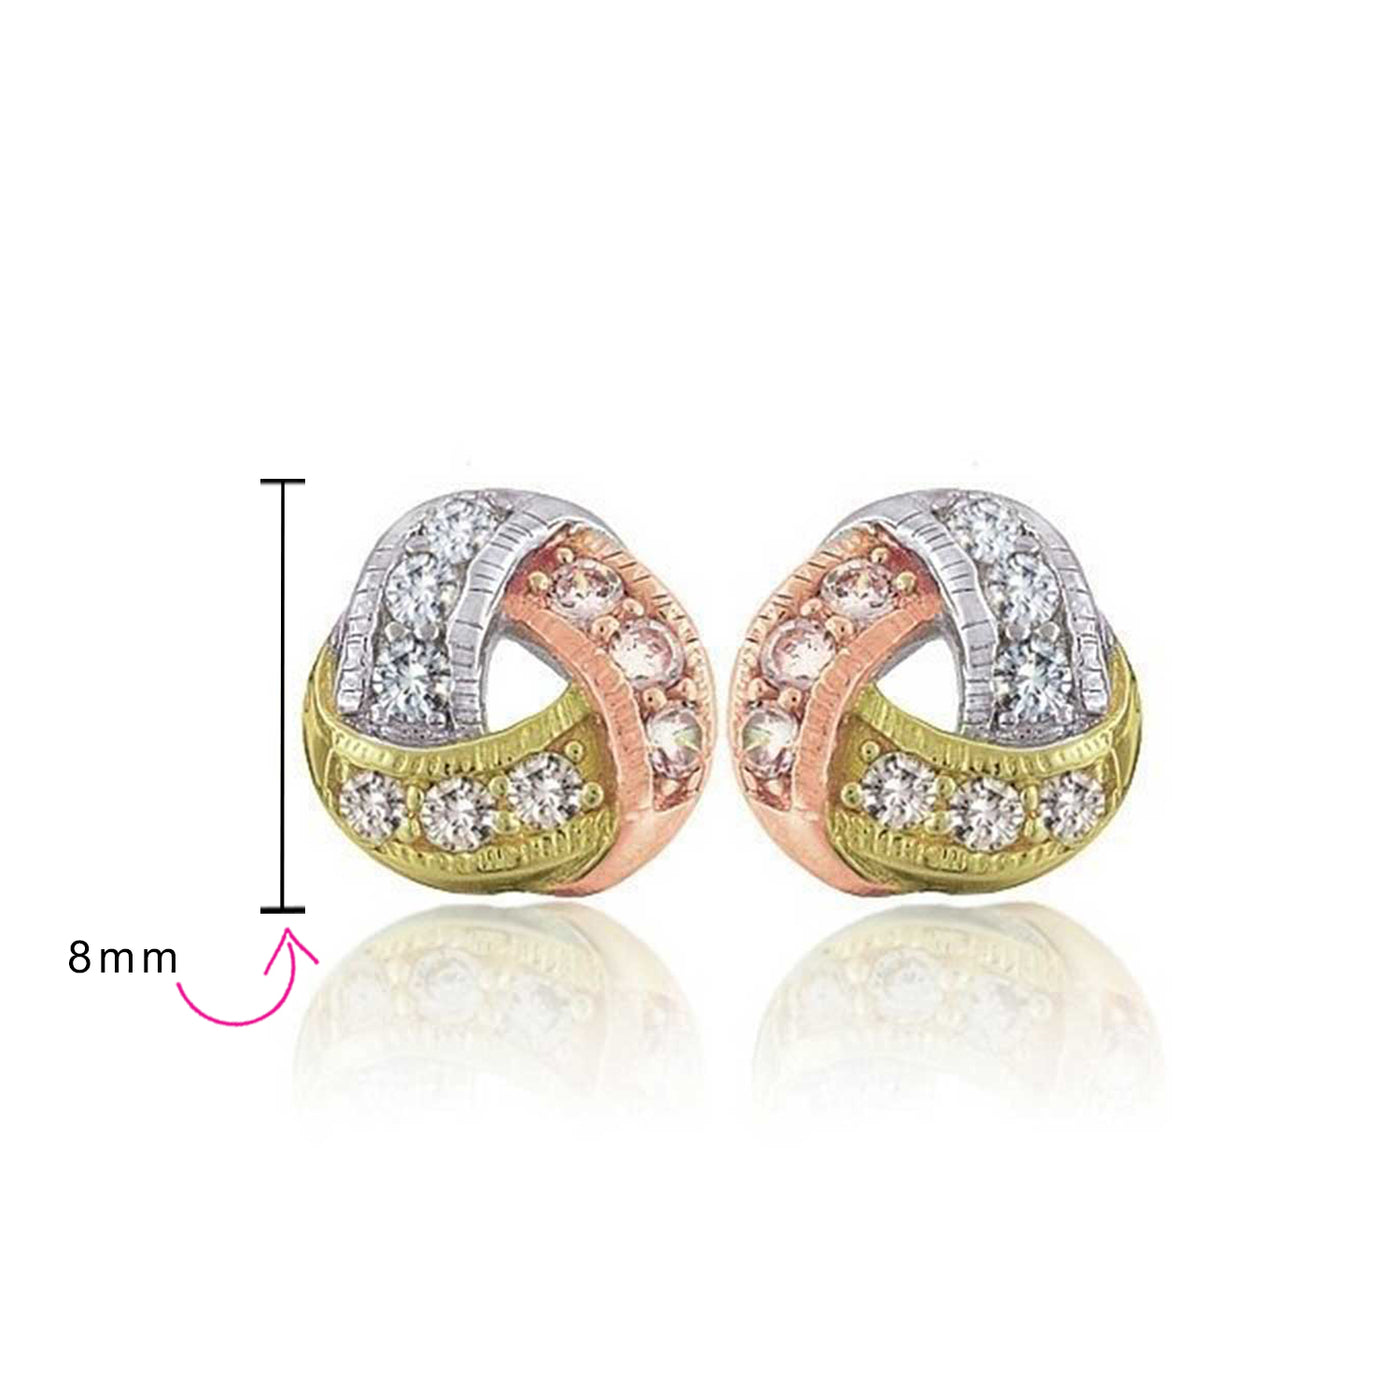 Tri Color Twisted CZ Stud Earrings Rose Gold Plated Sterling Silver